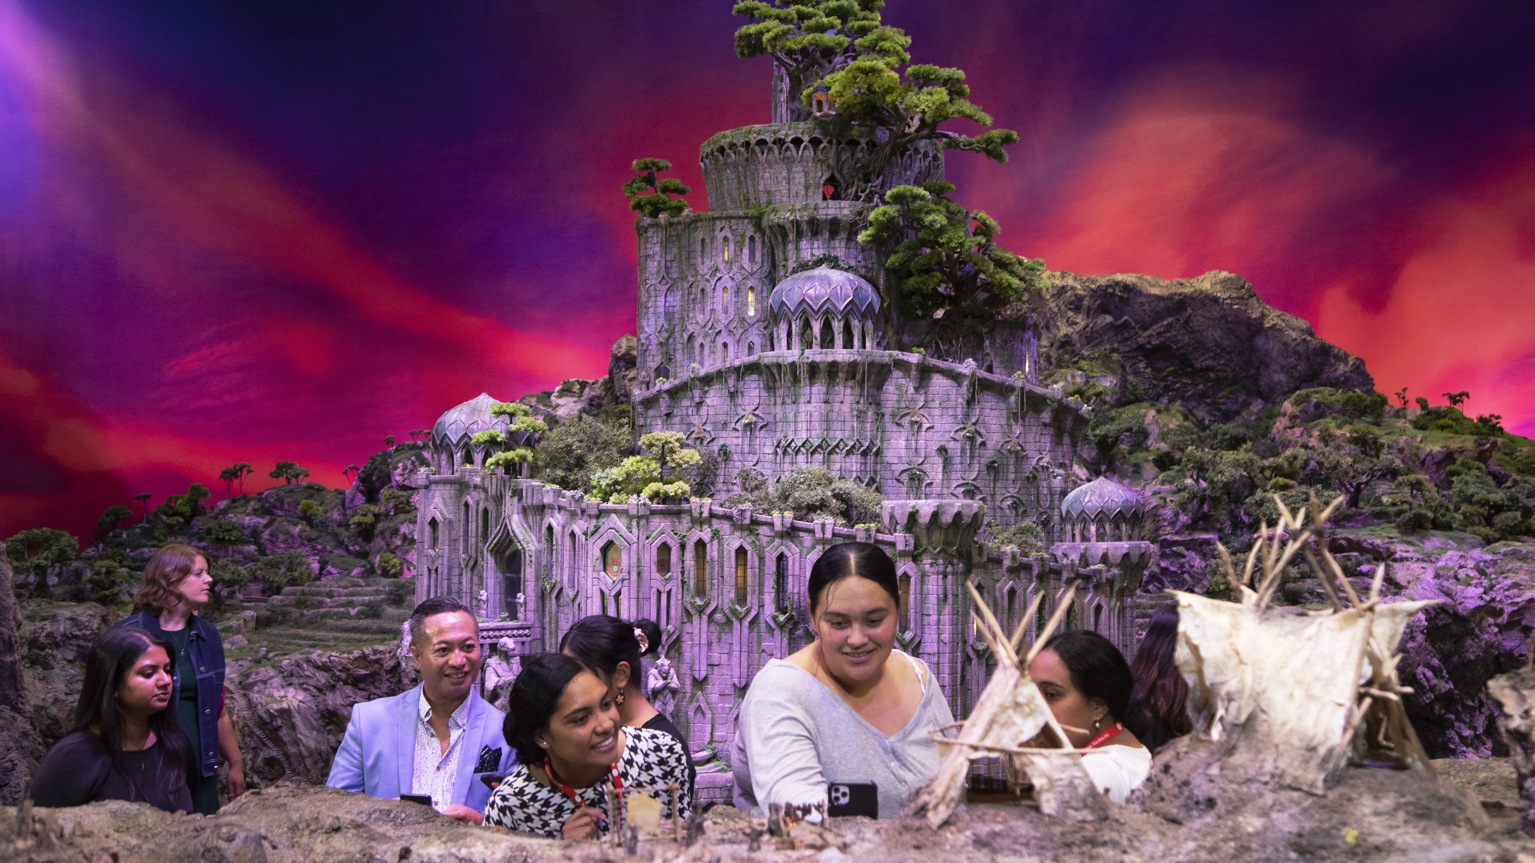 Tourists interact with model of castle and village buildings from Lord of the Rings